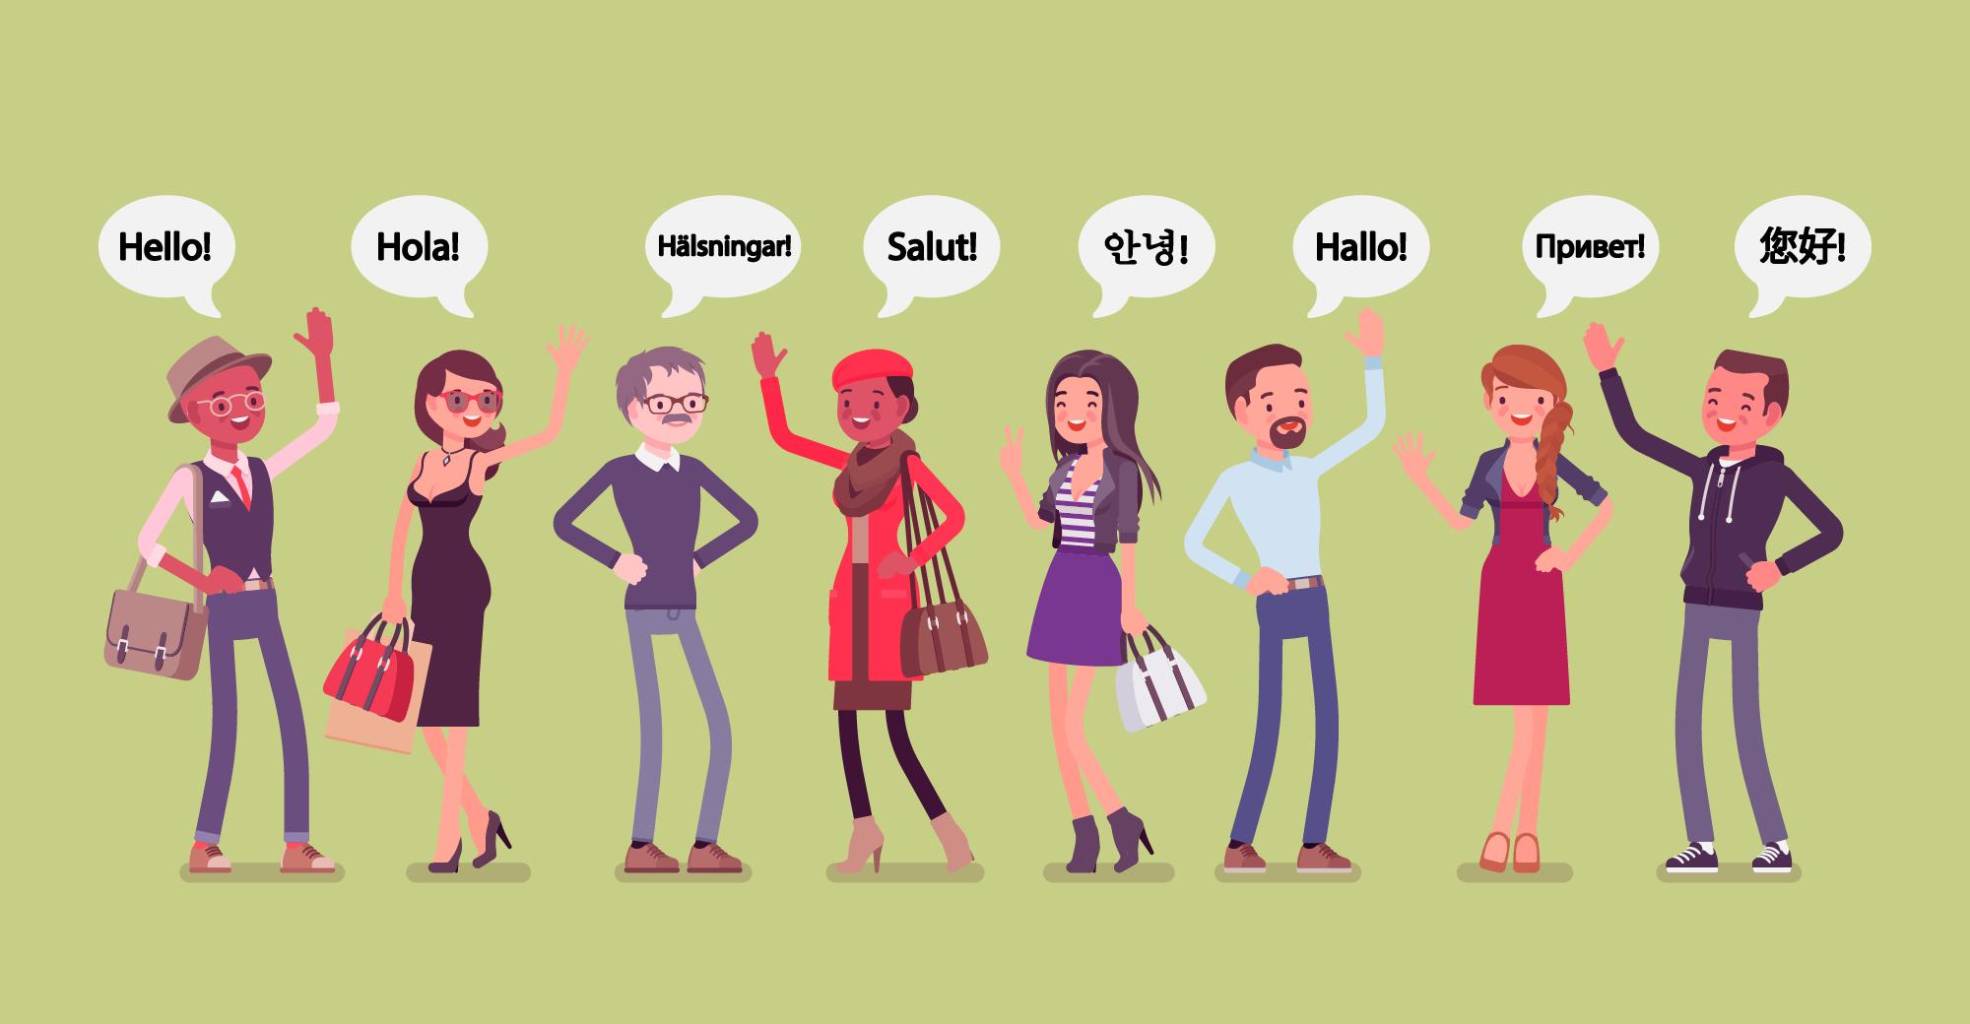 Greeting in different languages